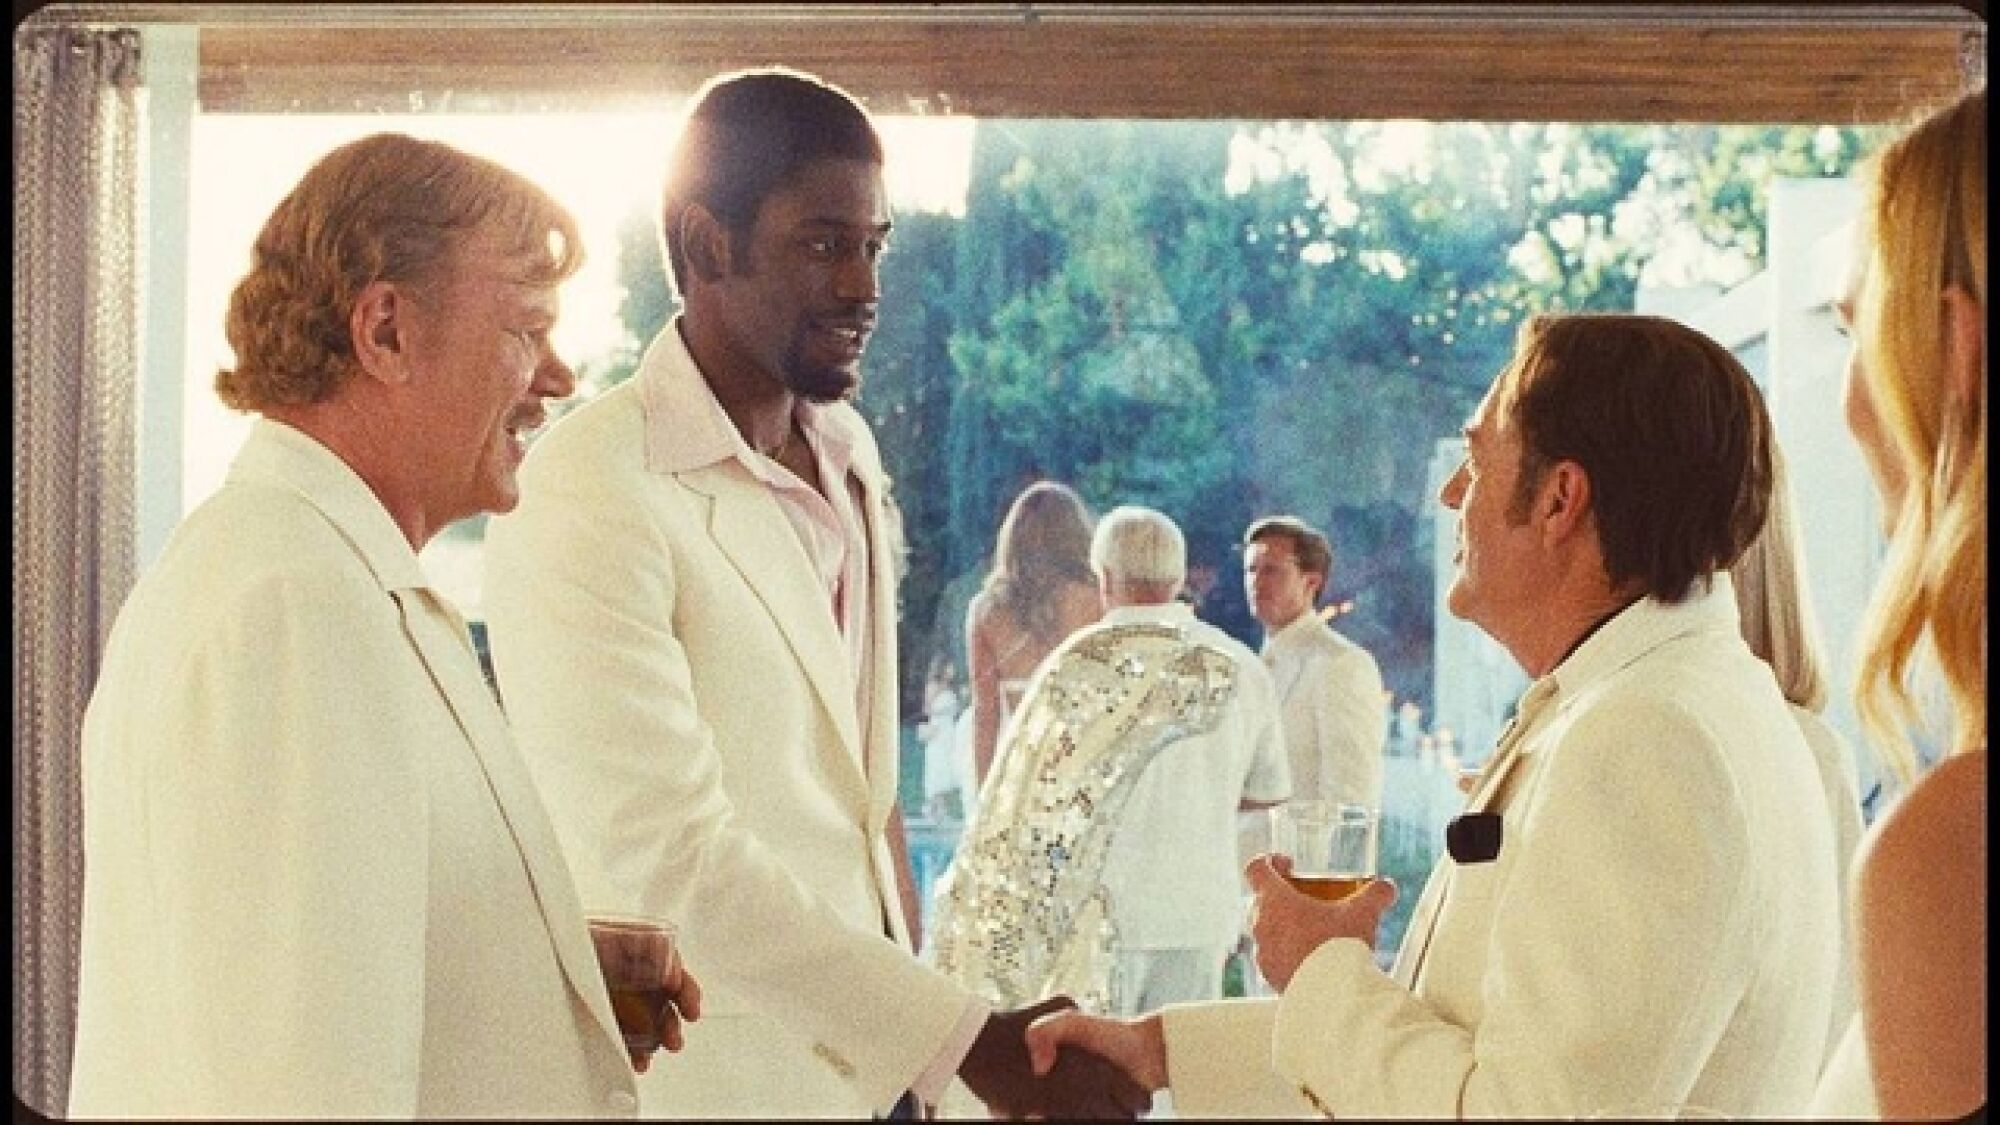 Reilly and Isaiah with Kirk Bovill, right, as Donald Sterling in "Winning Time."